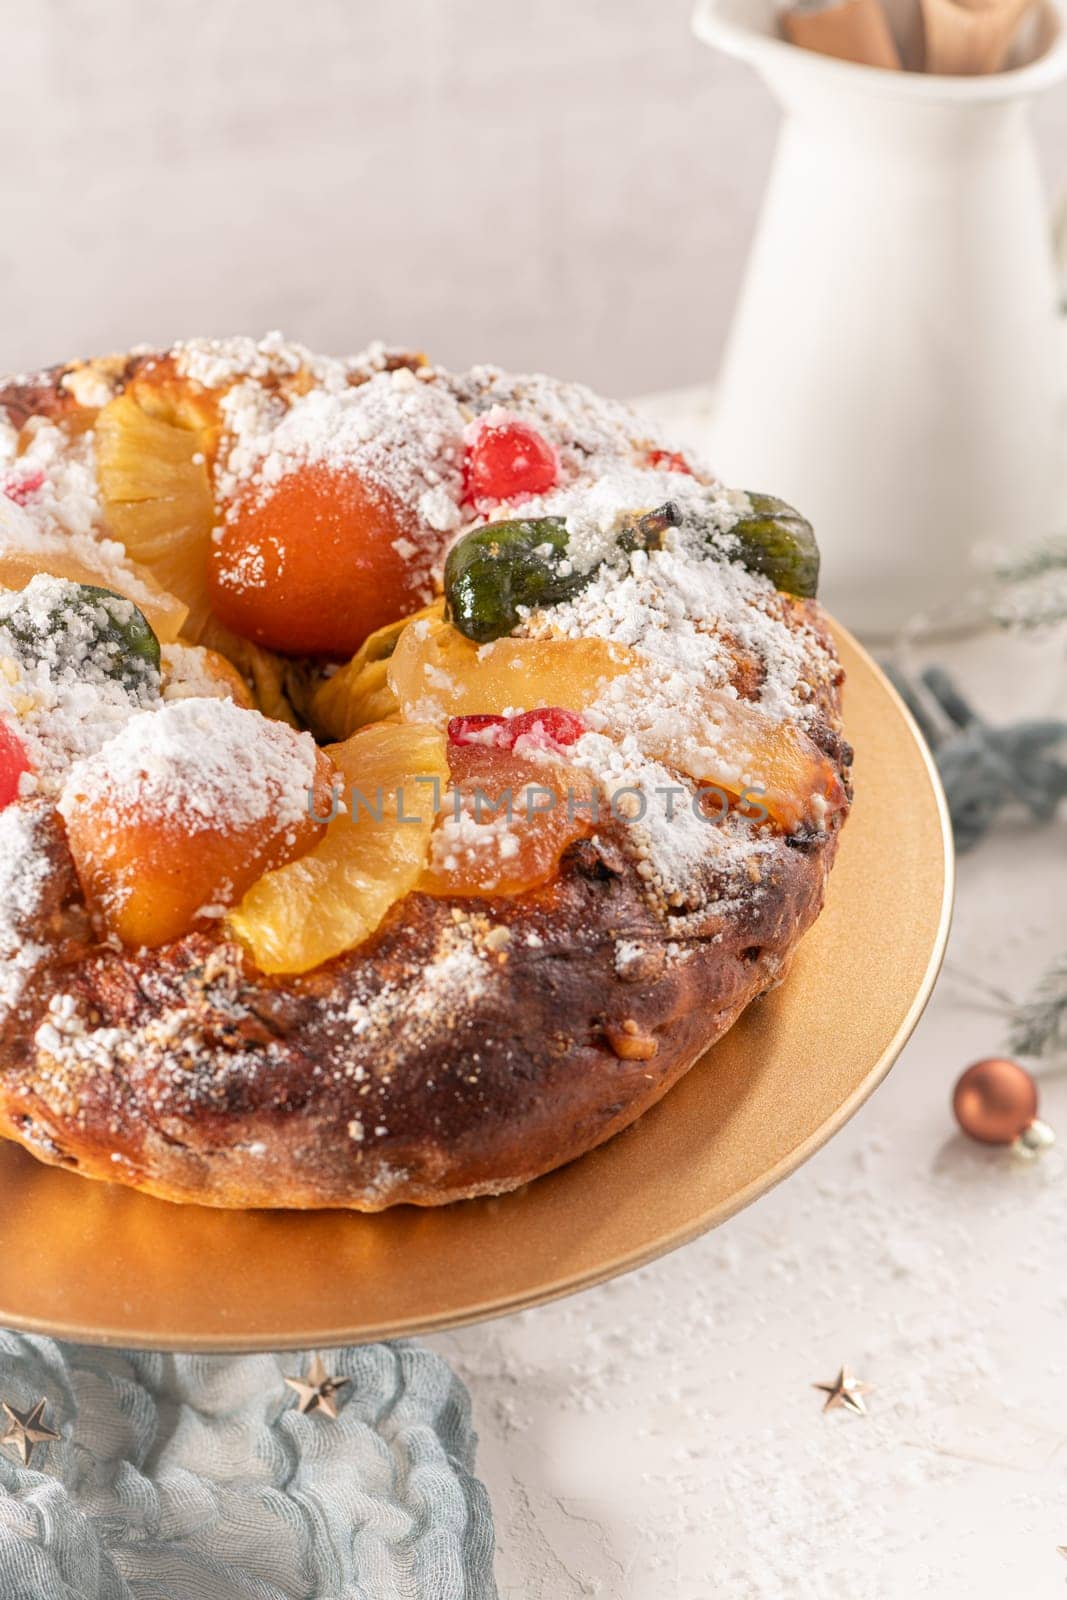 Bolo do Rei or King's Cake, Made for Christmas, Carnavale or Mardi Gras with Christmas season elements in Background.